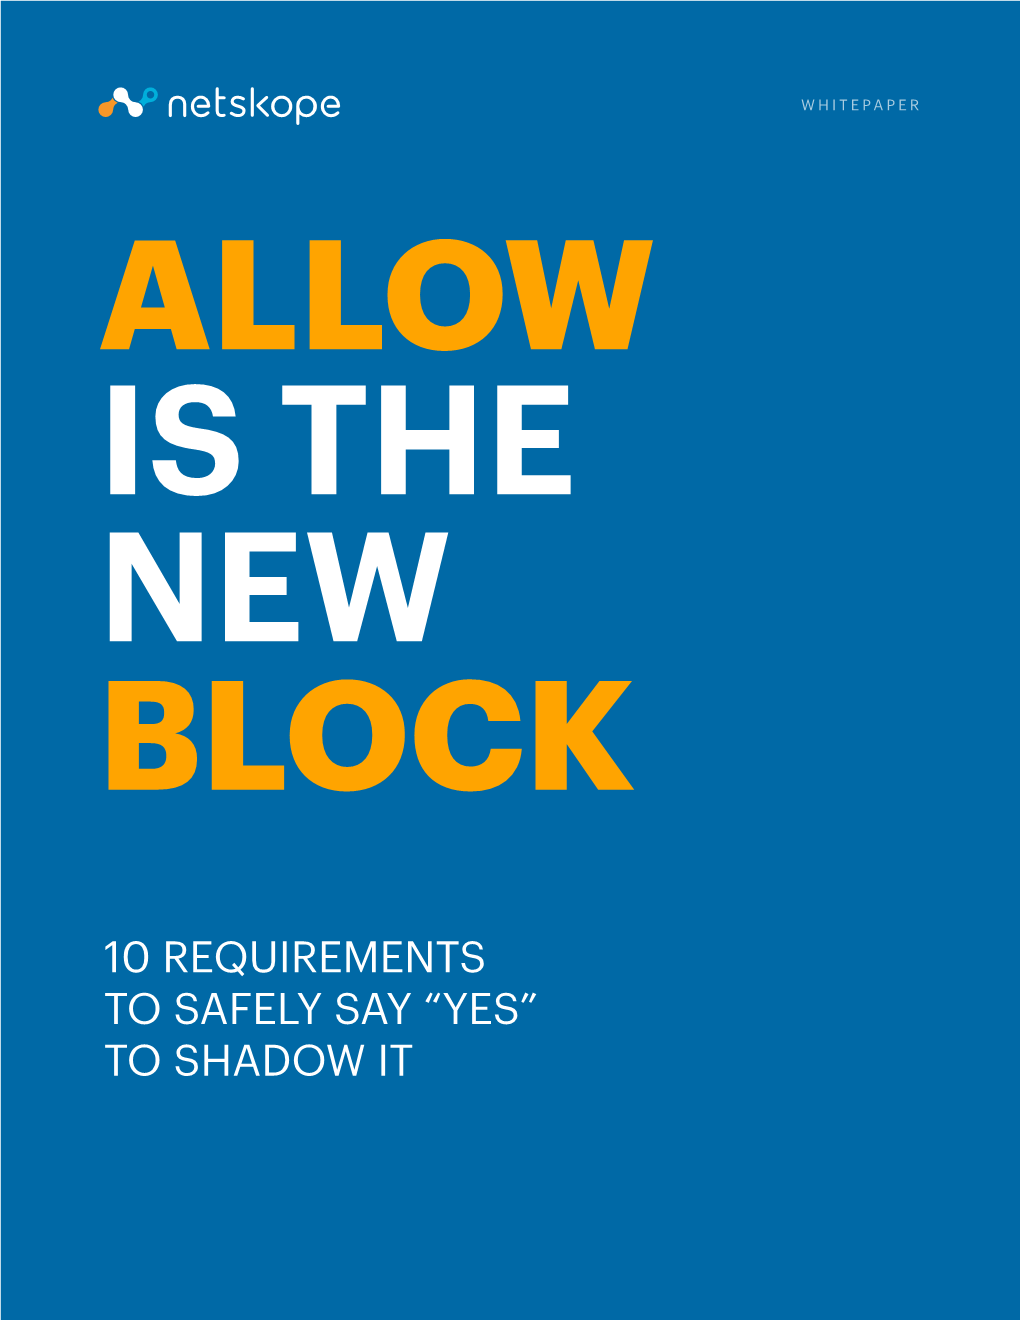 10 Requirements to Safely Say “Yes” to Shadow It Overview